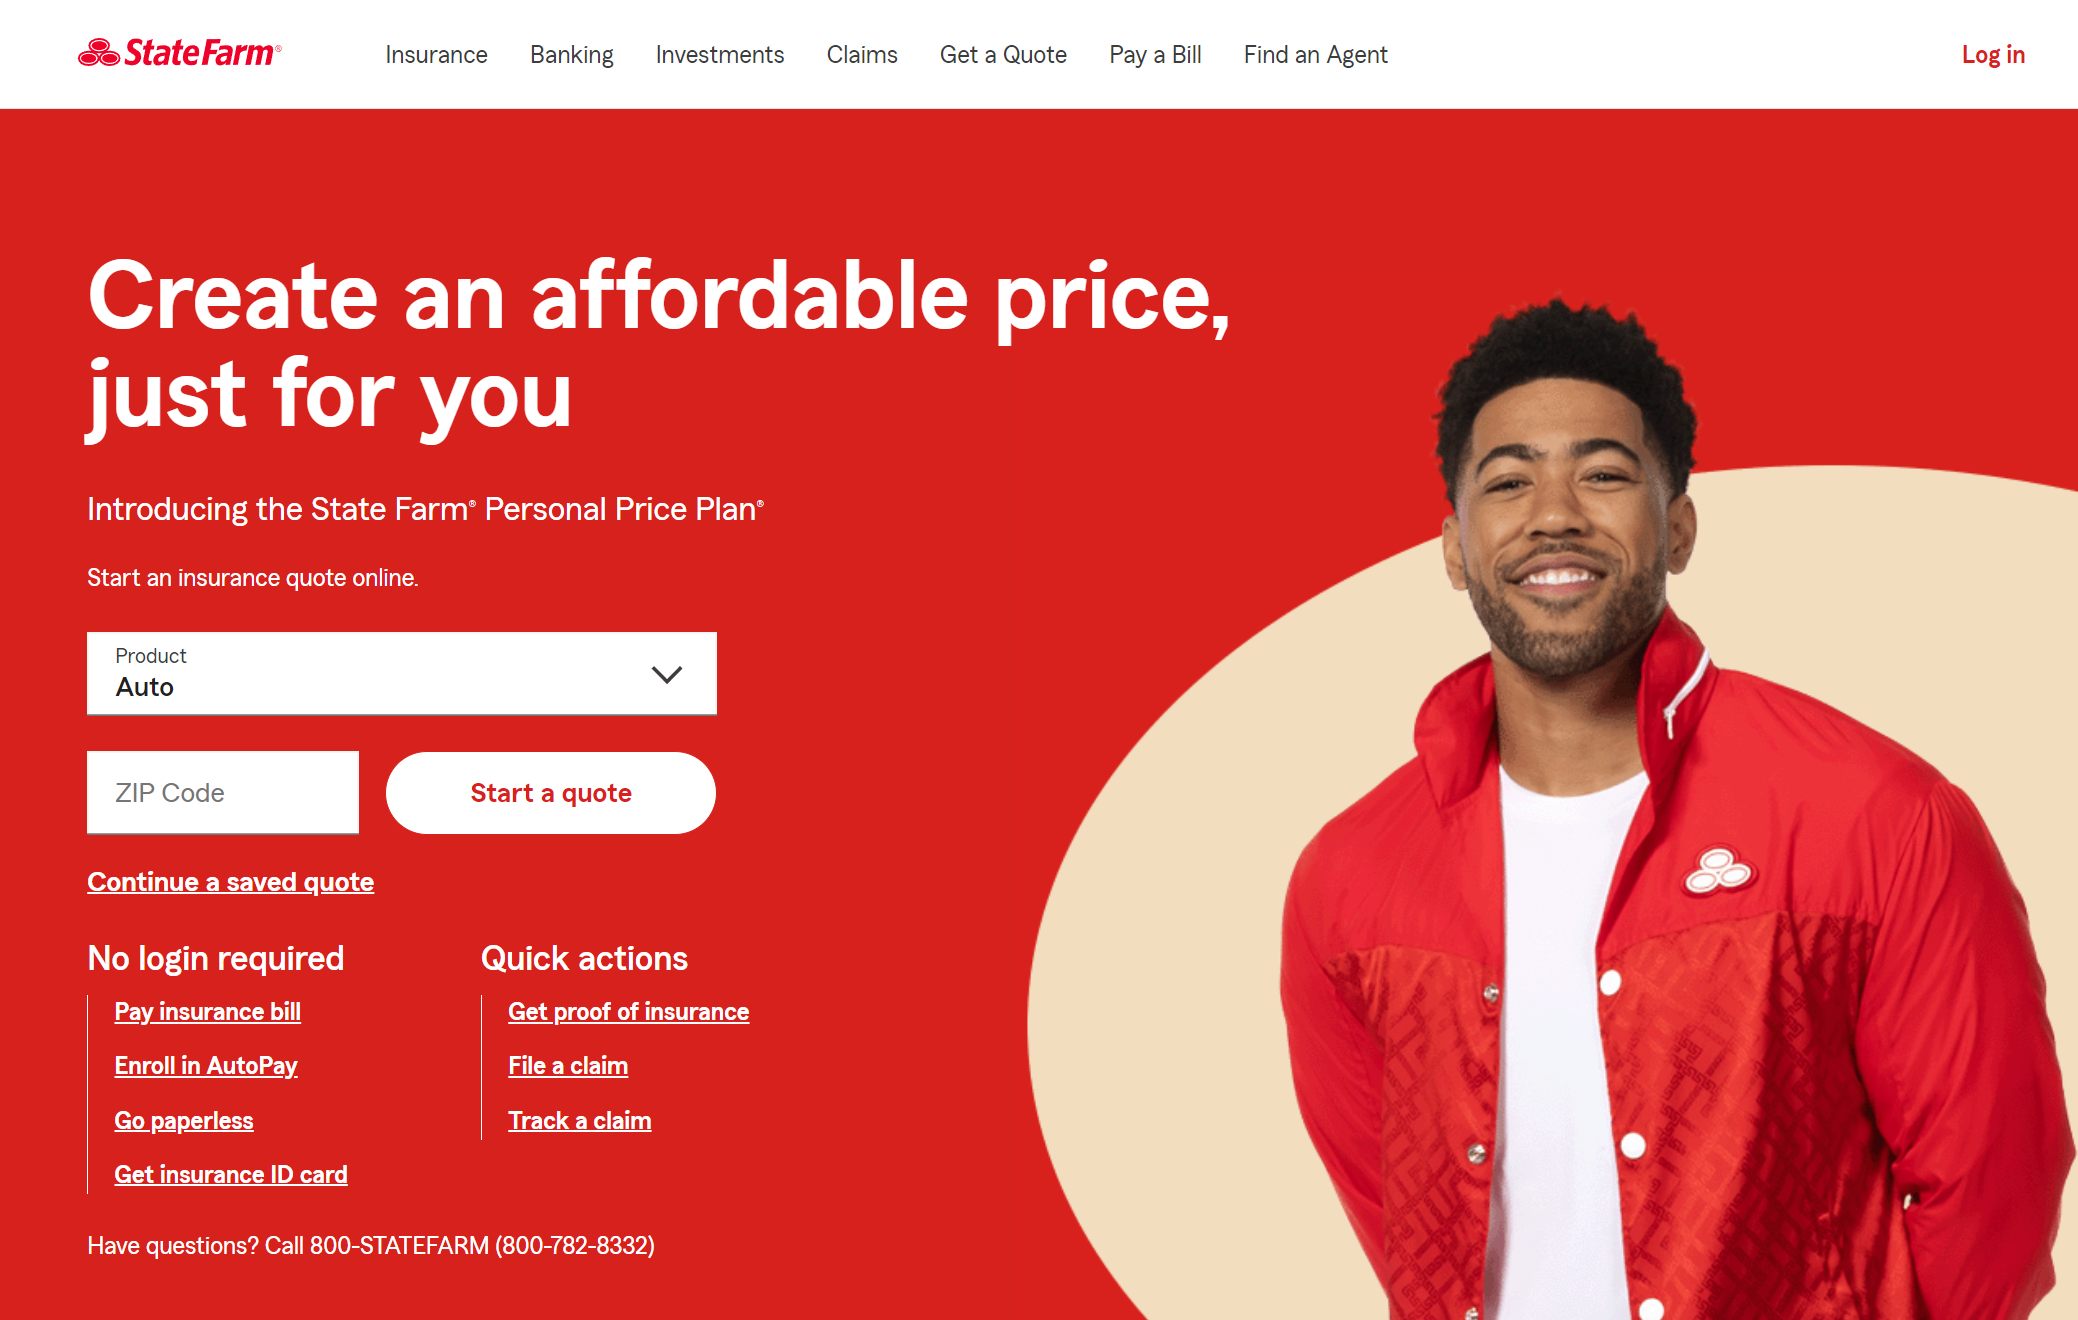 State Farm: Best Business Insurance for Etsy Businesses